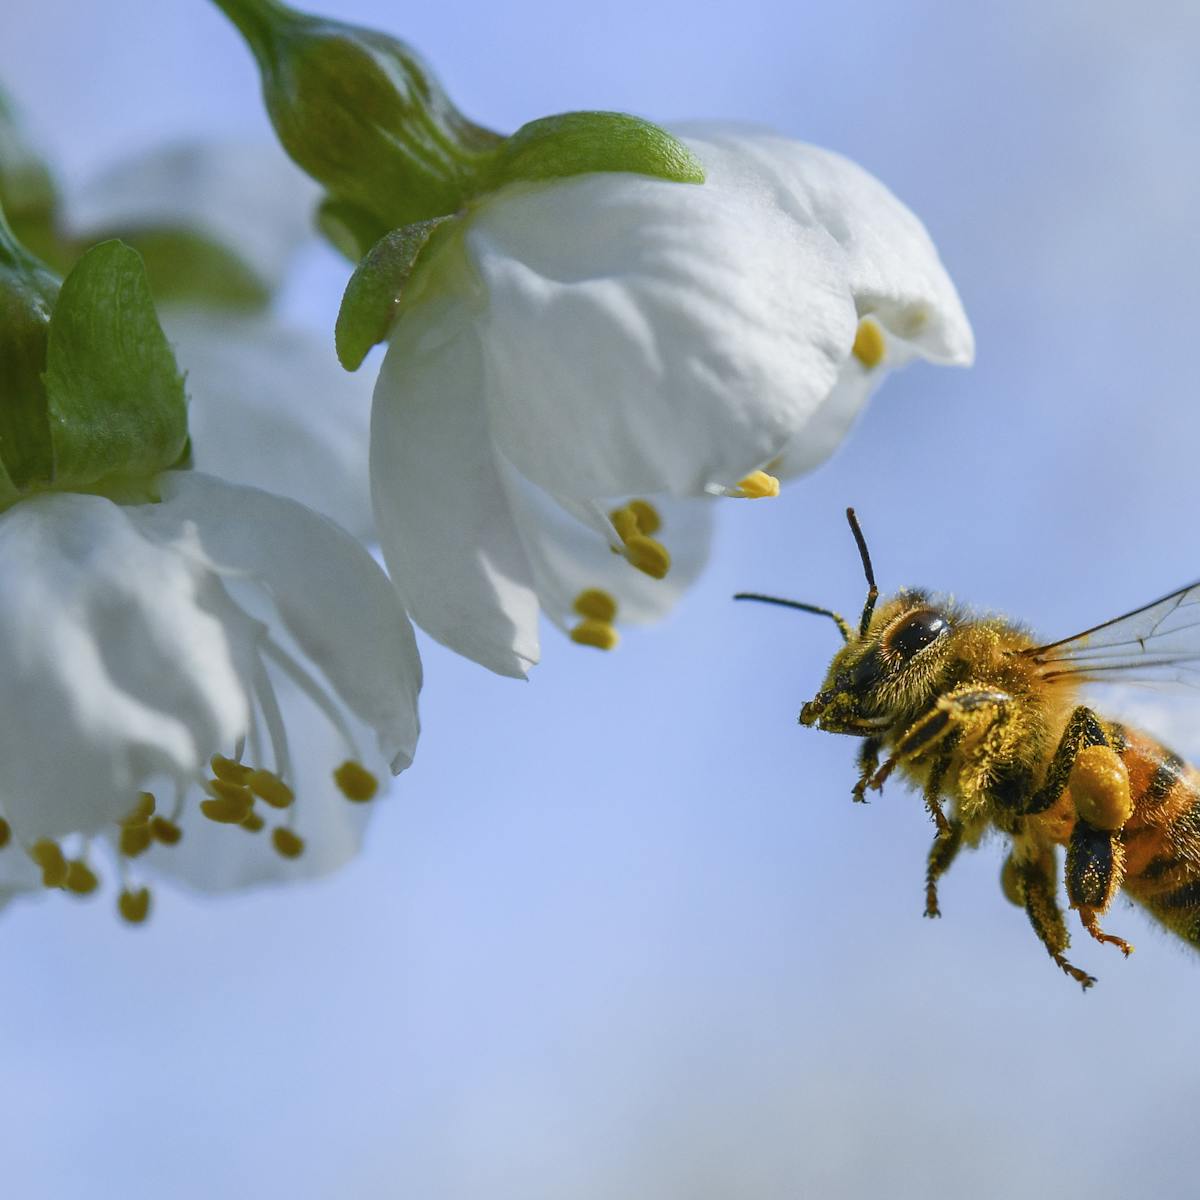 A bee economist explains honey bees' vital role in growing tasty almonds